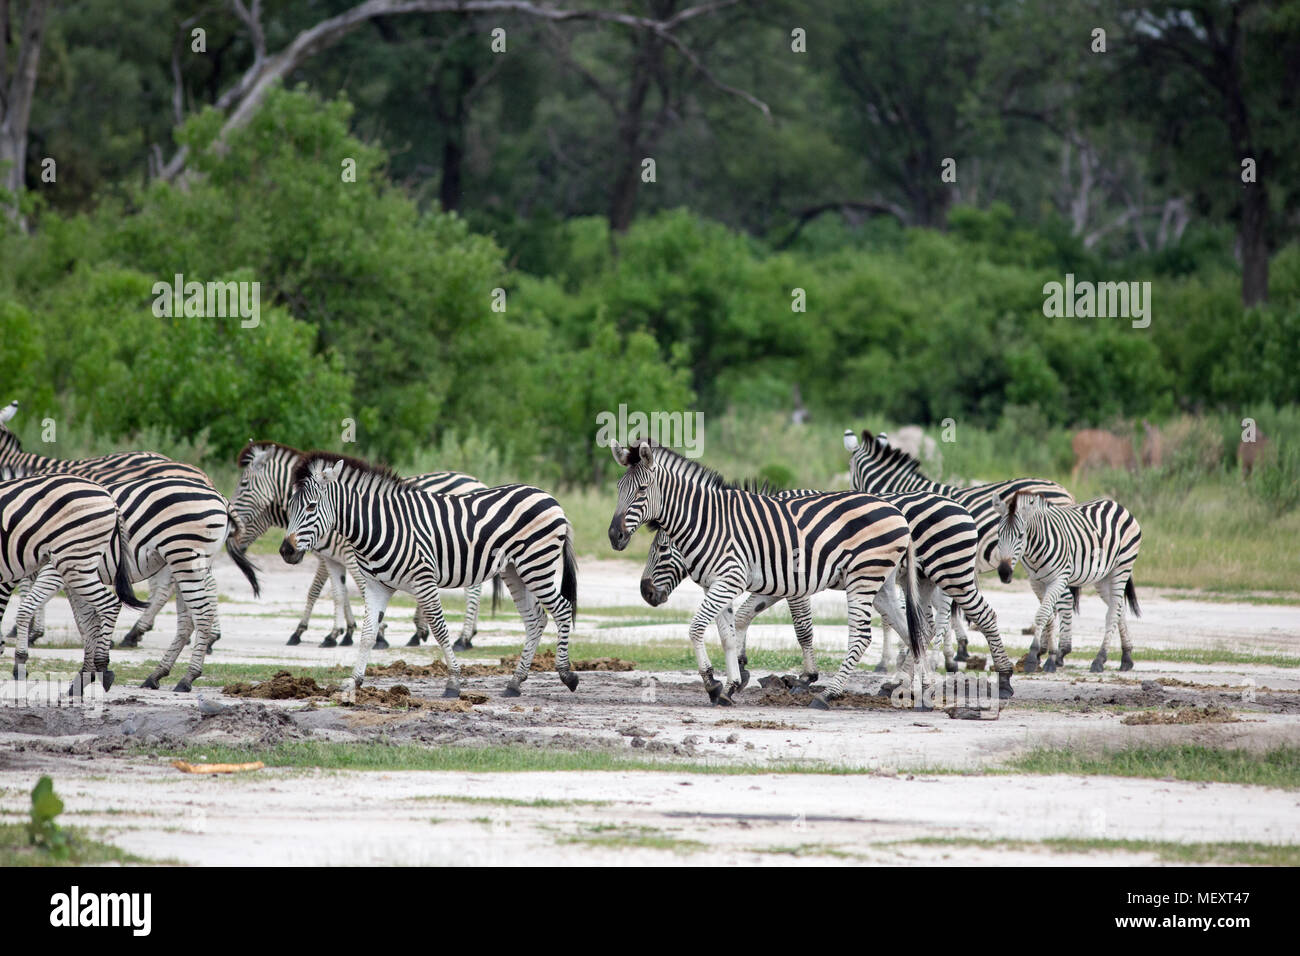 Zebra Equus quagga burchellii. Moving together. One animal overlapping others in motion makes the selection of an individual by a predator difficult. Stock Photo